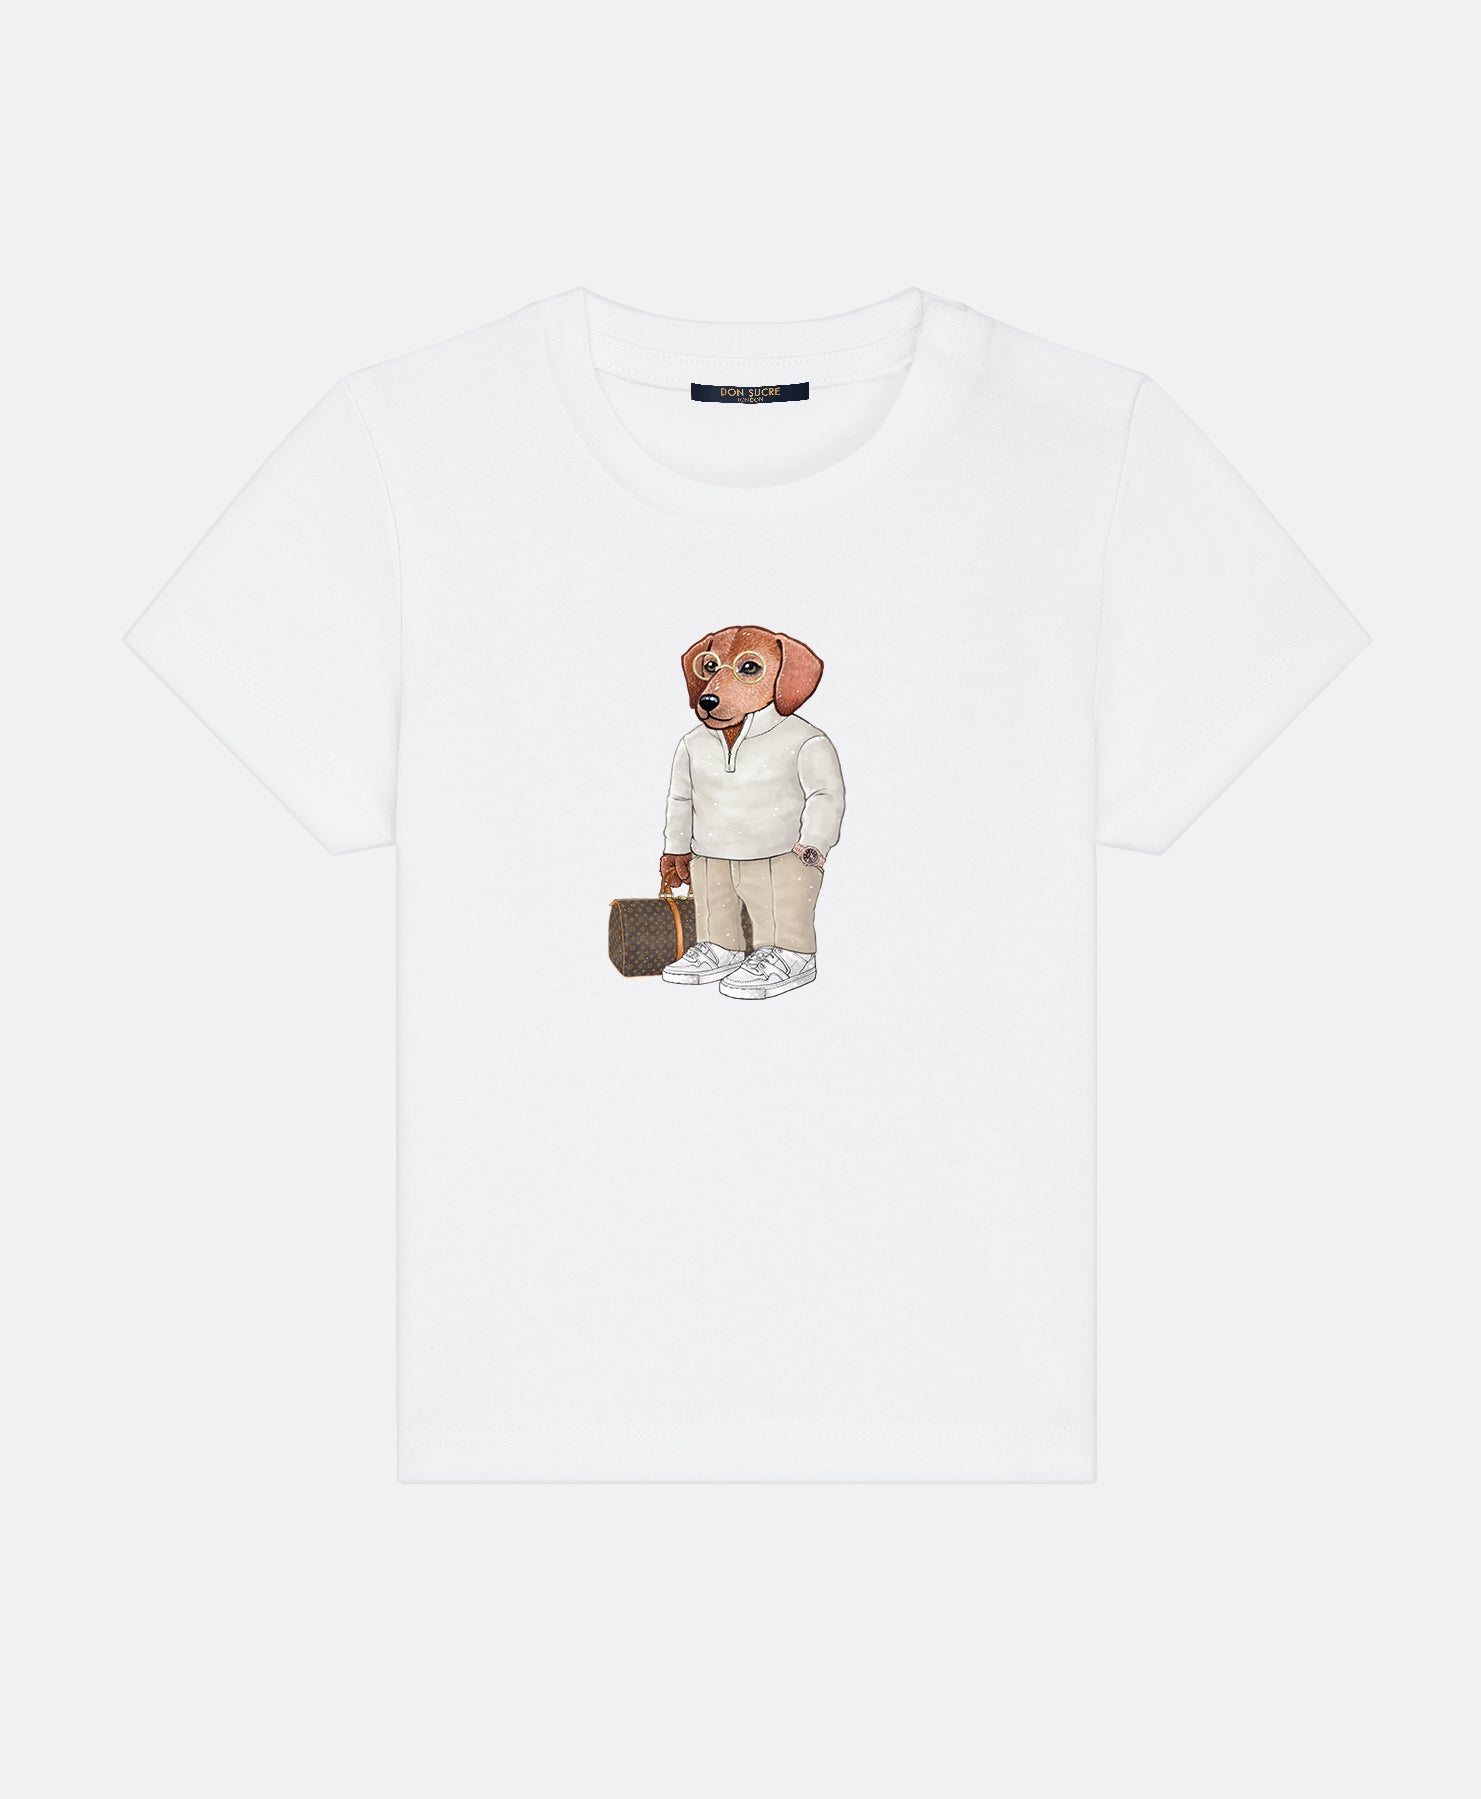 Doxie "Top Dog" T-Shirt Kids